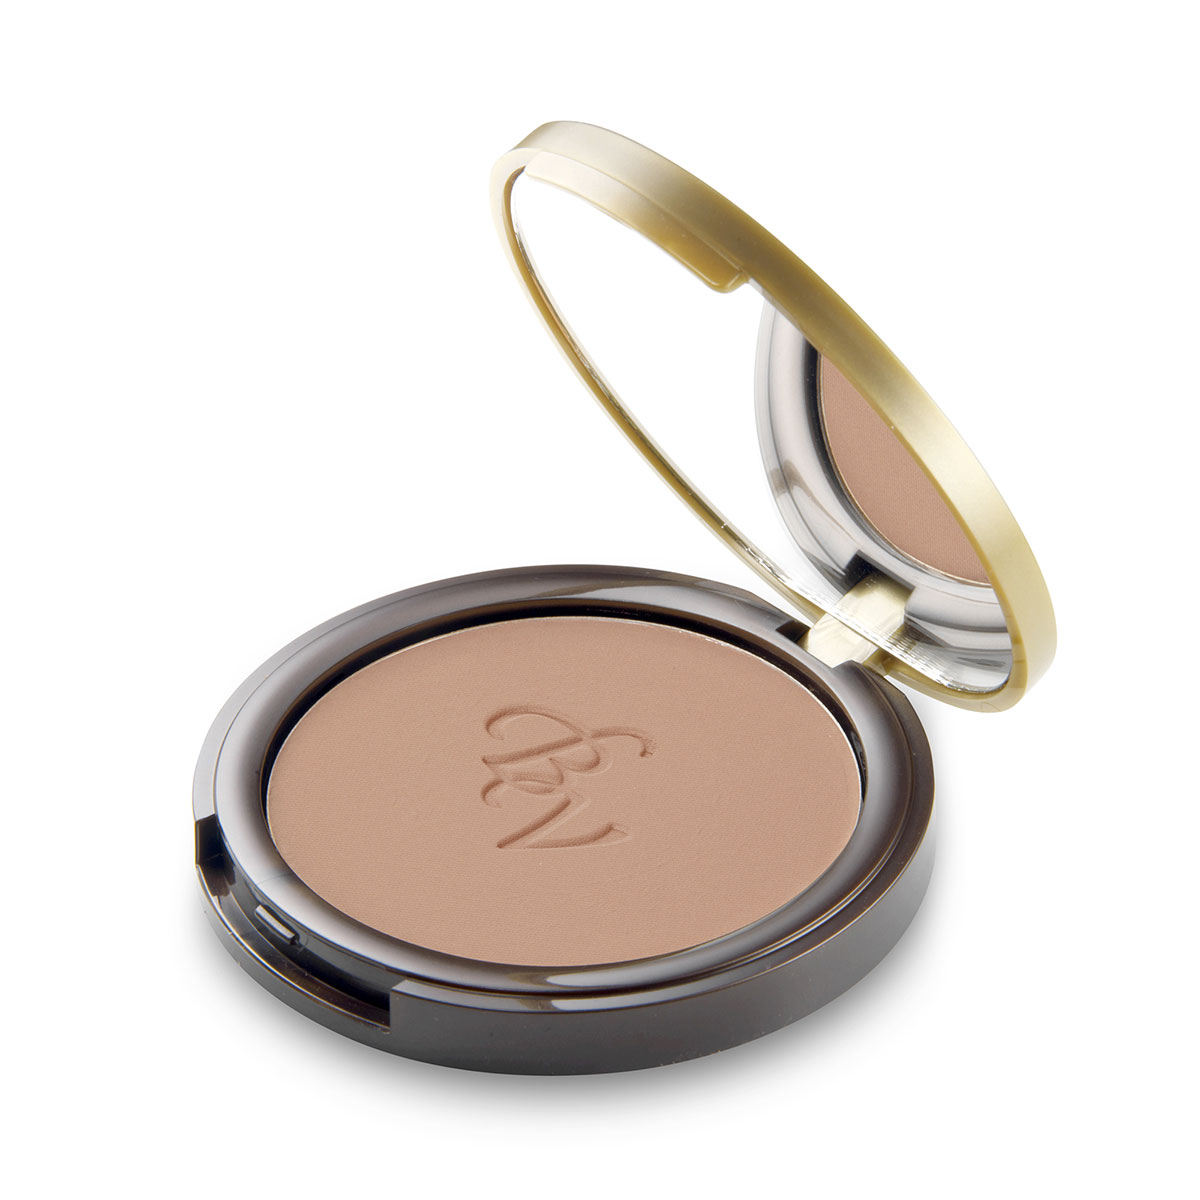 Bronzing pressed powder with camellia extract and vitamin E (8 g) - natural result